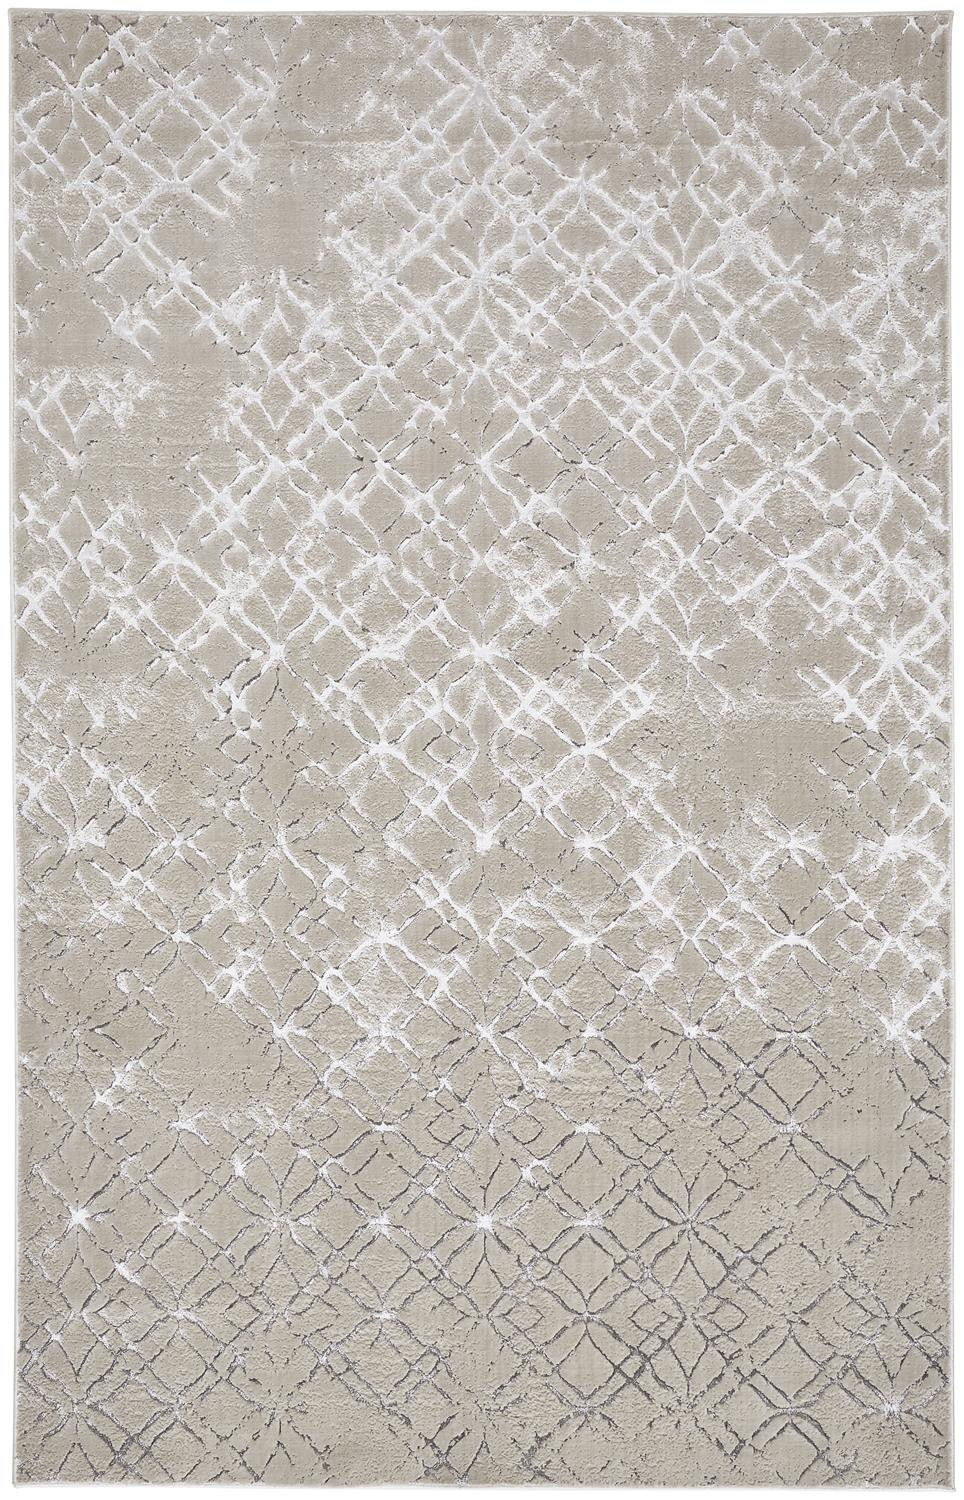 2' X 3' Silver Gray And White Abstract Stain Resistant Area Rug-511505-1